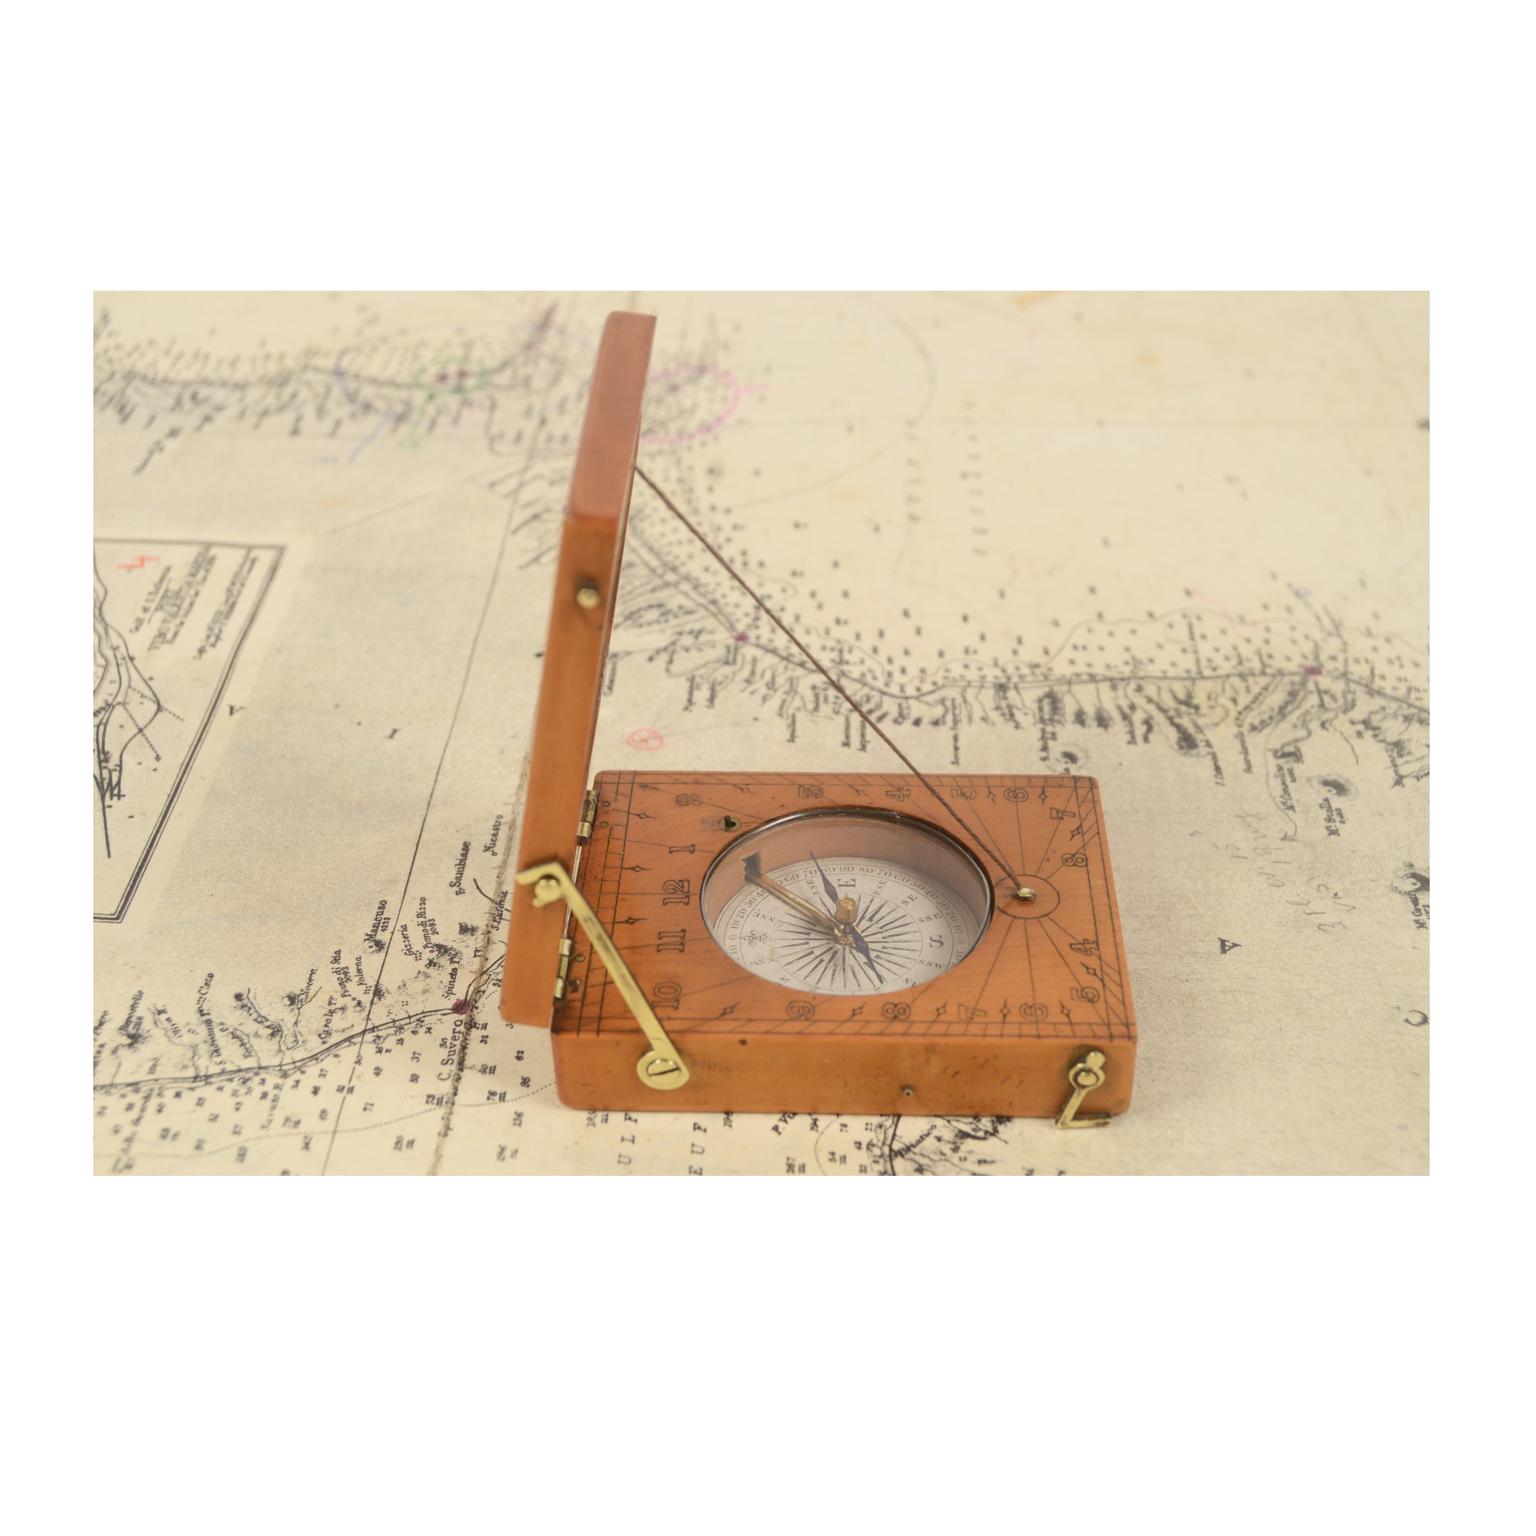 Engraved Boxwood Sundial English Manufacture of the 18th Century 2